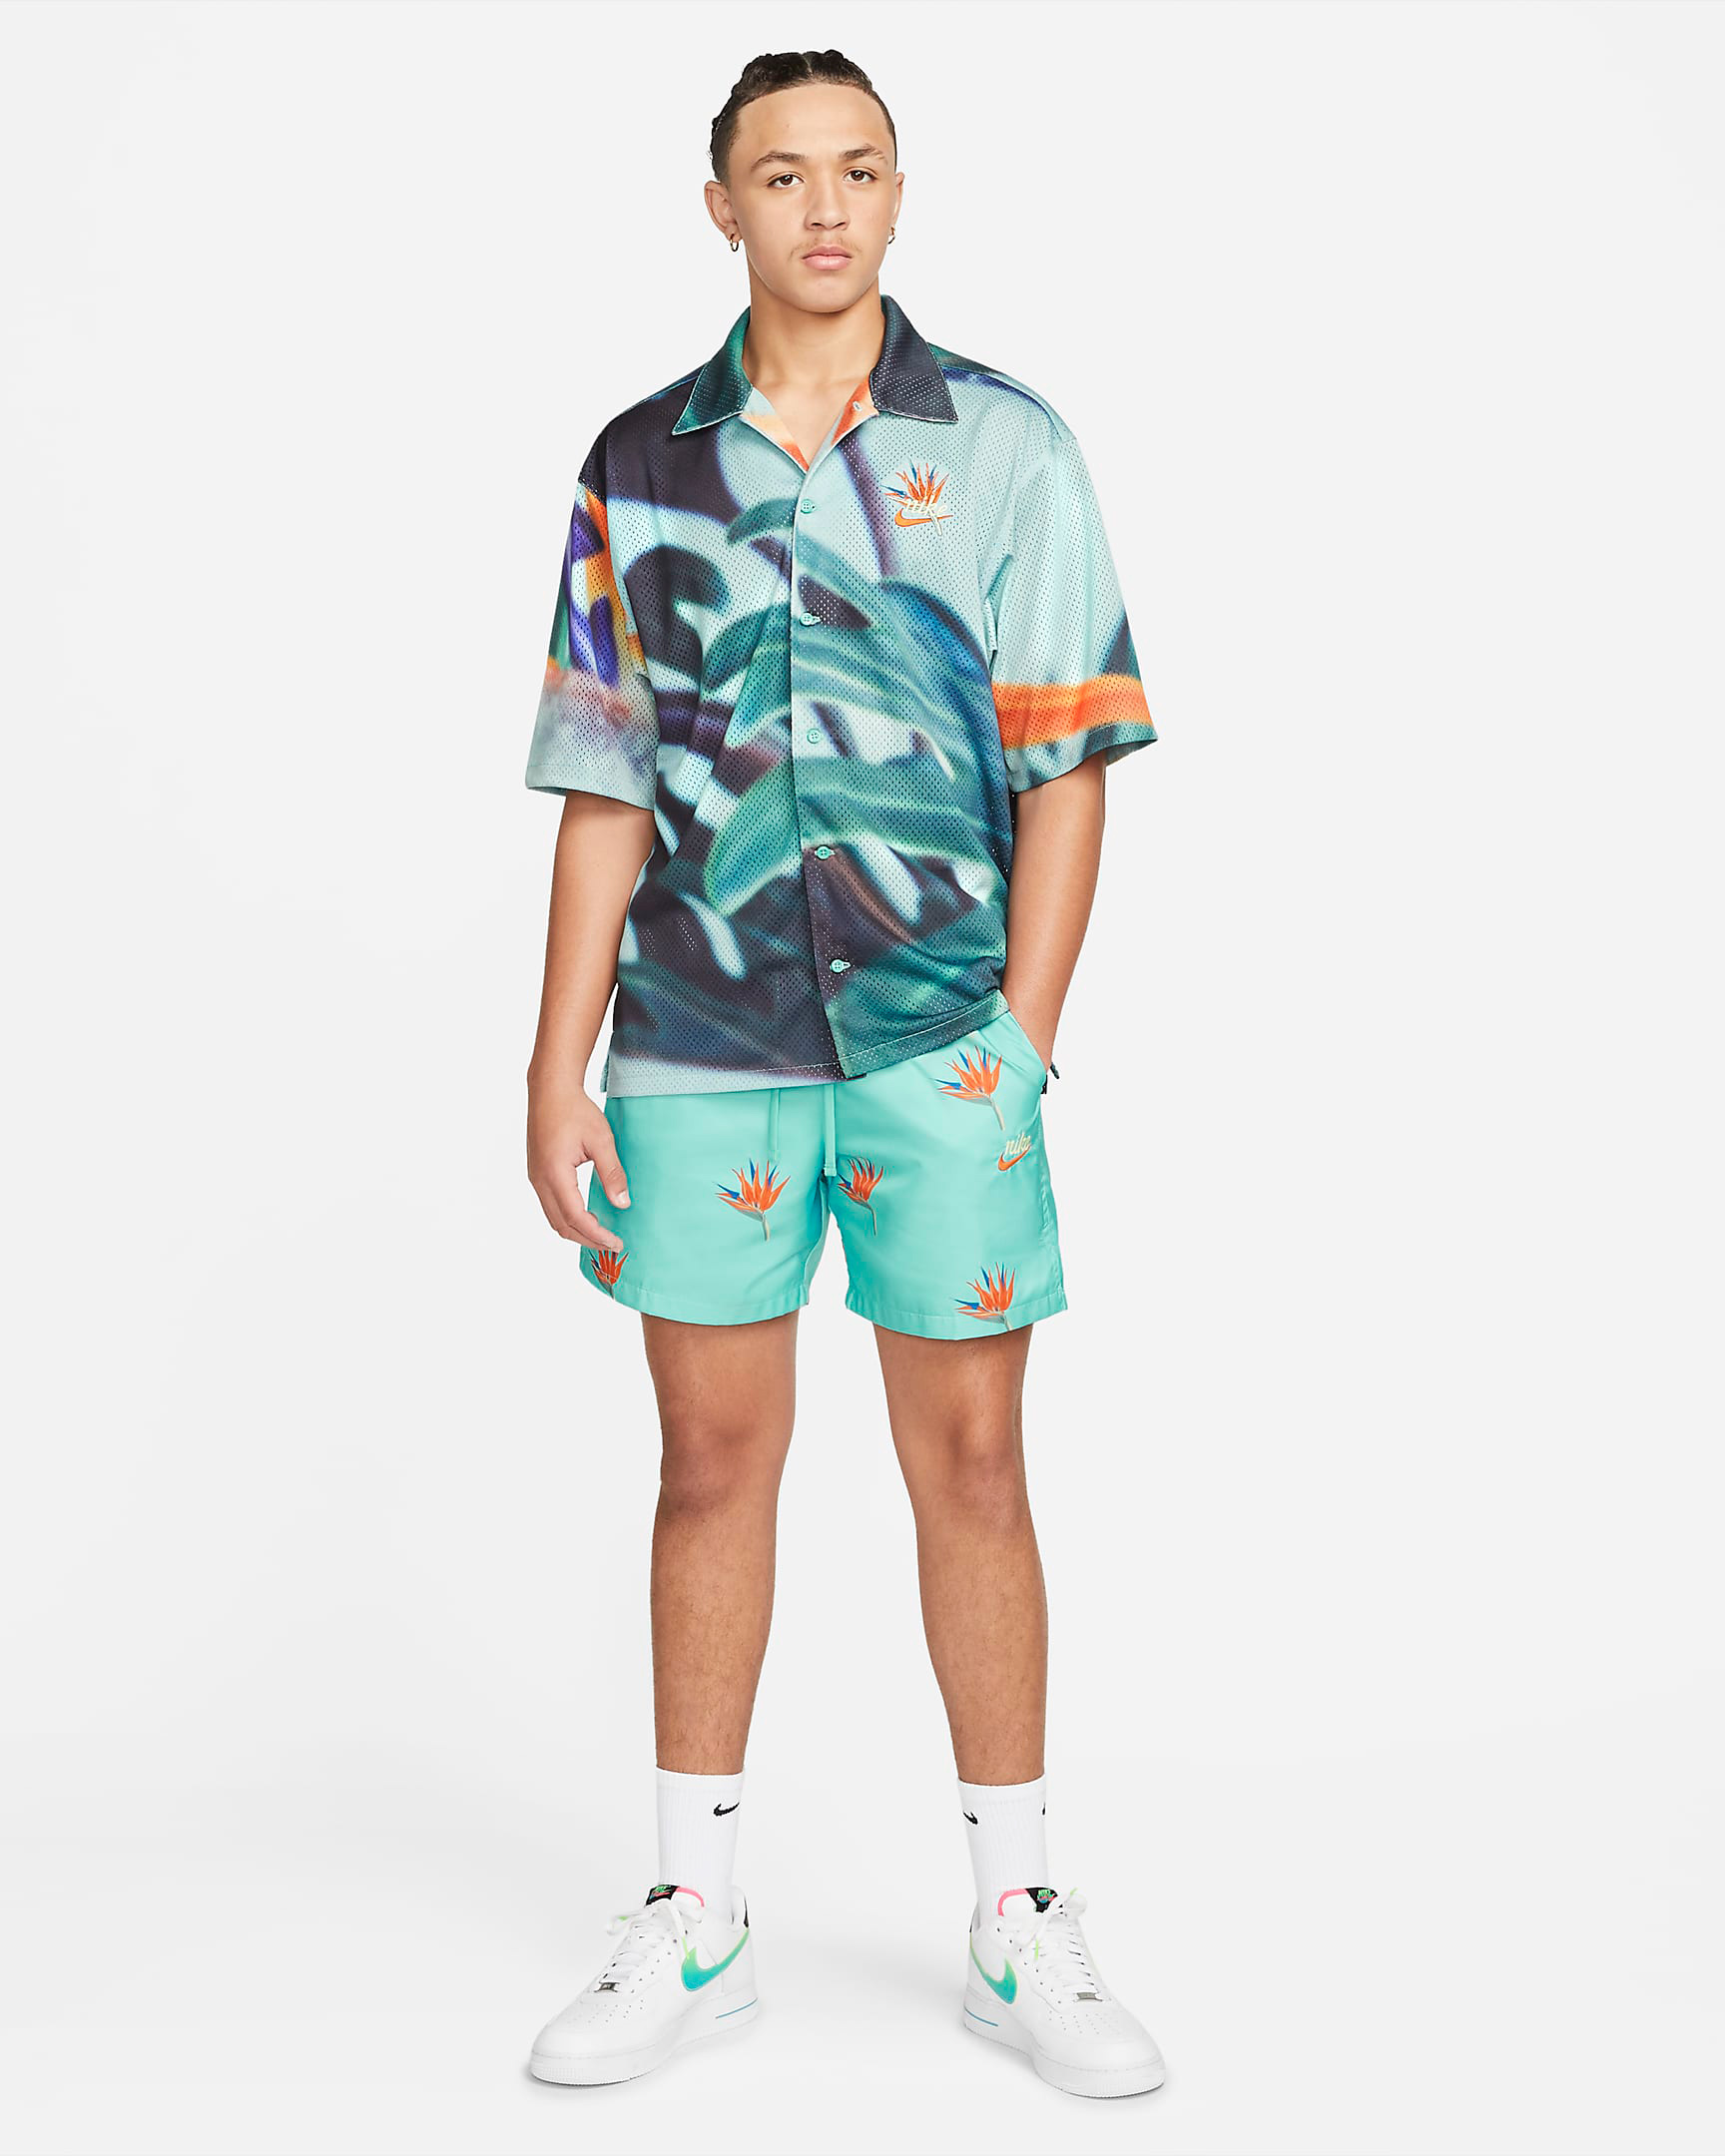 nike-washed-teal-resort-wovn-flow-shorts-shirt-outfit